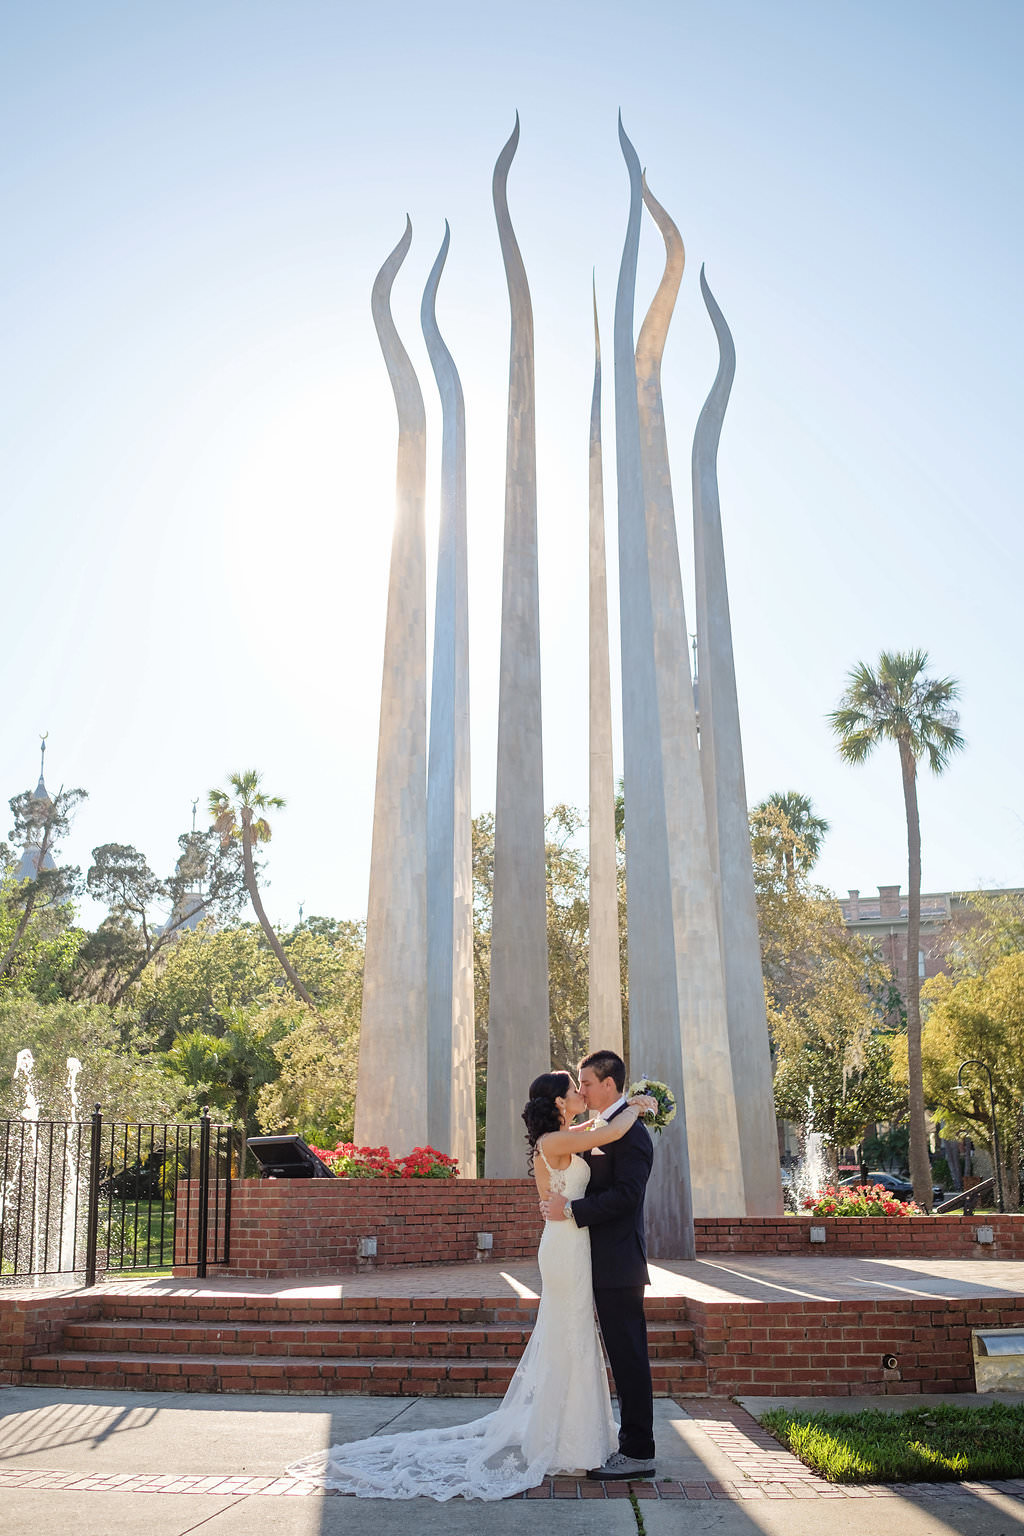 Outdoor Bride and Groom Wedding Portrait Groom in Navy Blue Tuxedo and Bride Wearing Strappy White Lace Wedding Dress with Lace Train in Front of Sculpture | Tampa Bay Wedding Photographer Marc Edwards Photographs